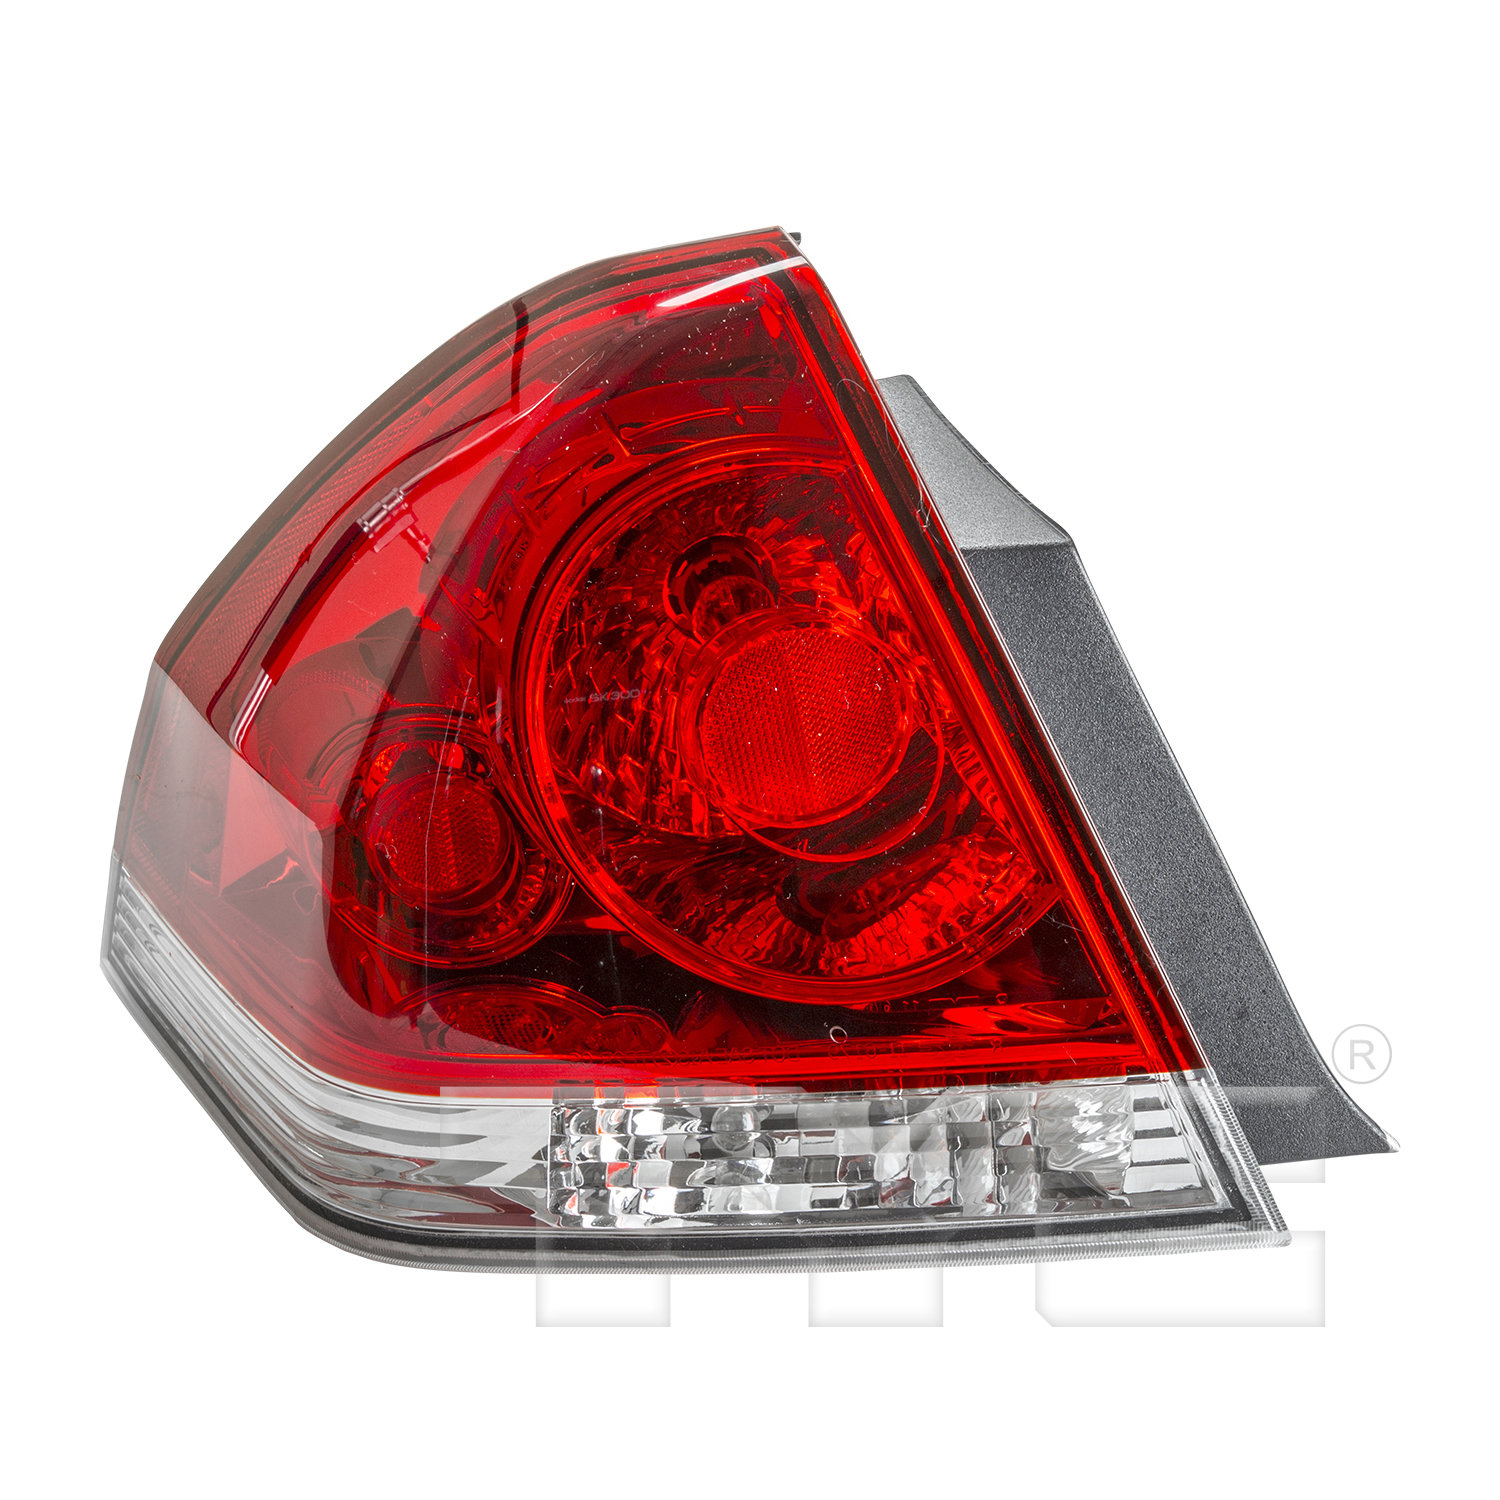 Aftermarket TAILLIGHTS for CHEVROLET - IMPALA, IMPALA,06-13,LT Taillamp assy